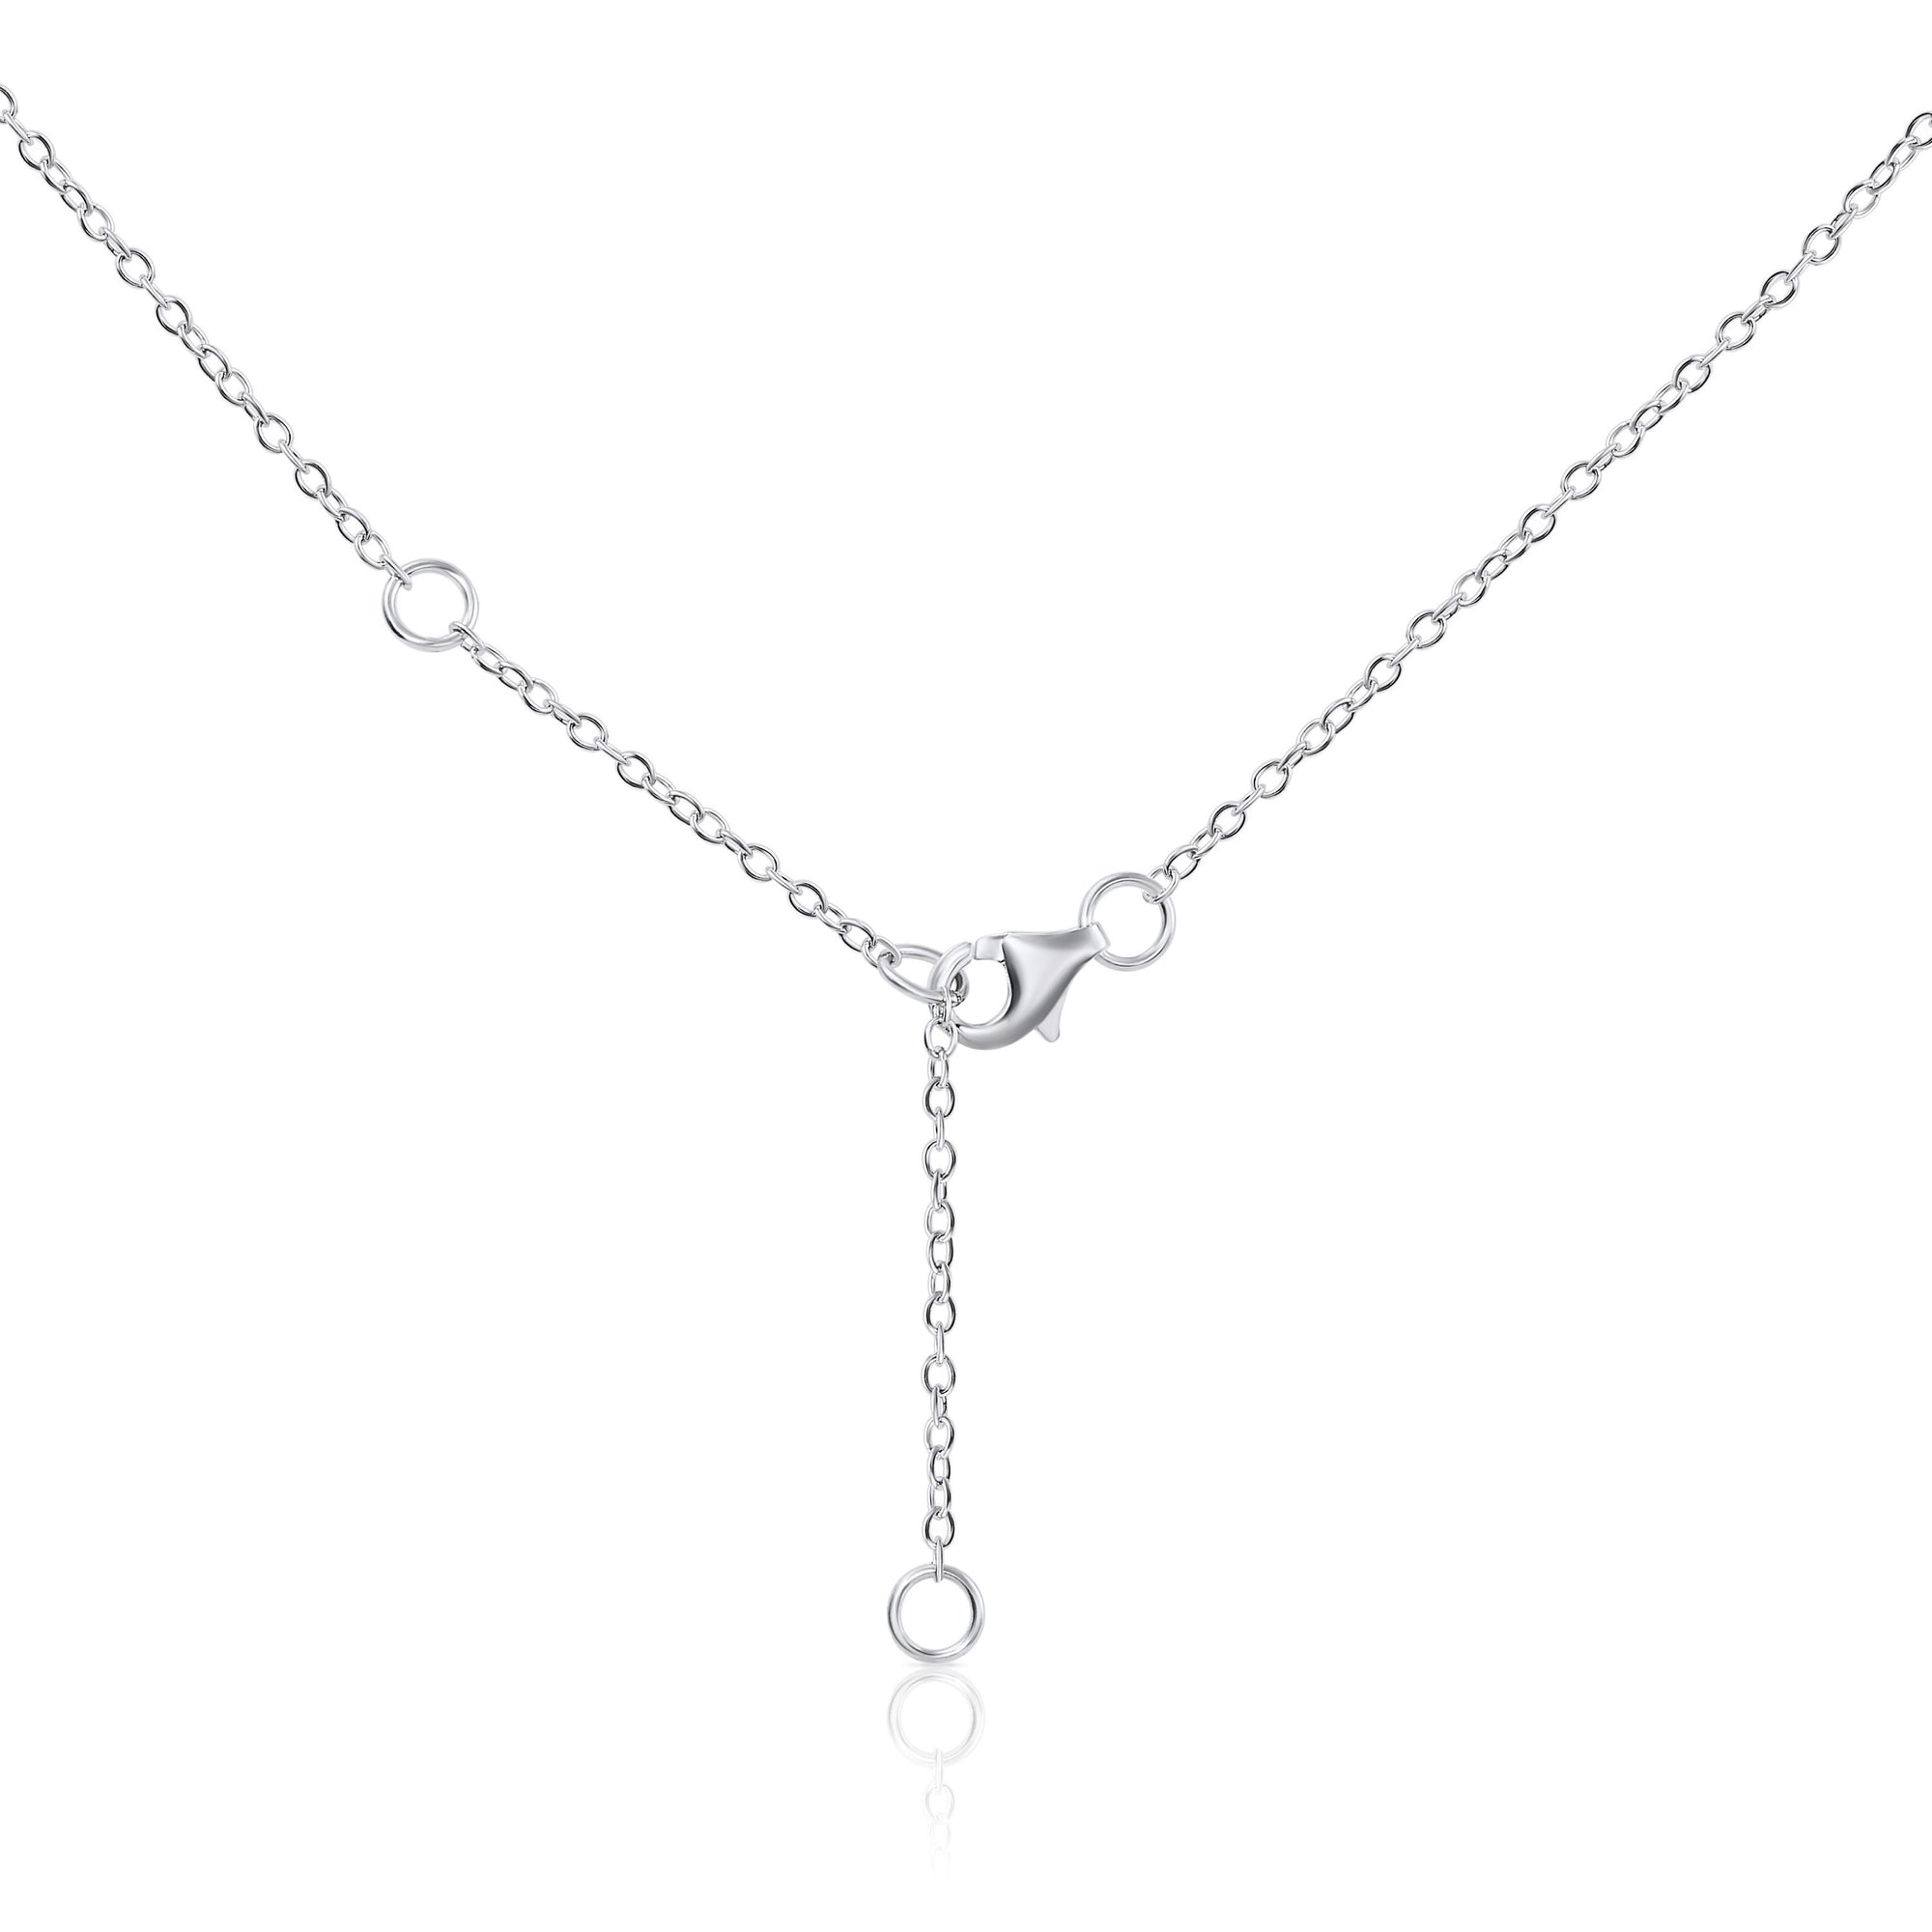 Shining Star Charm Necklace in Sterling Silver